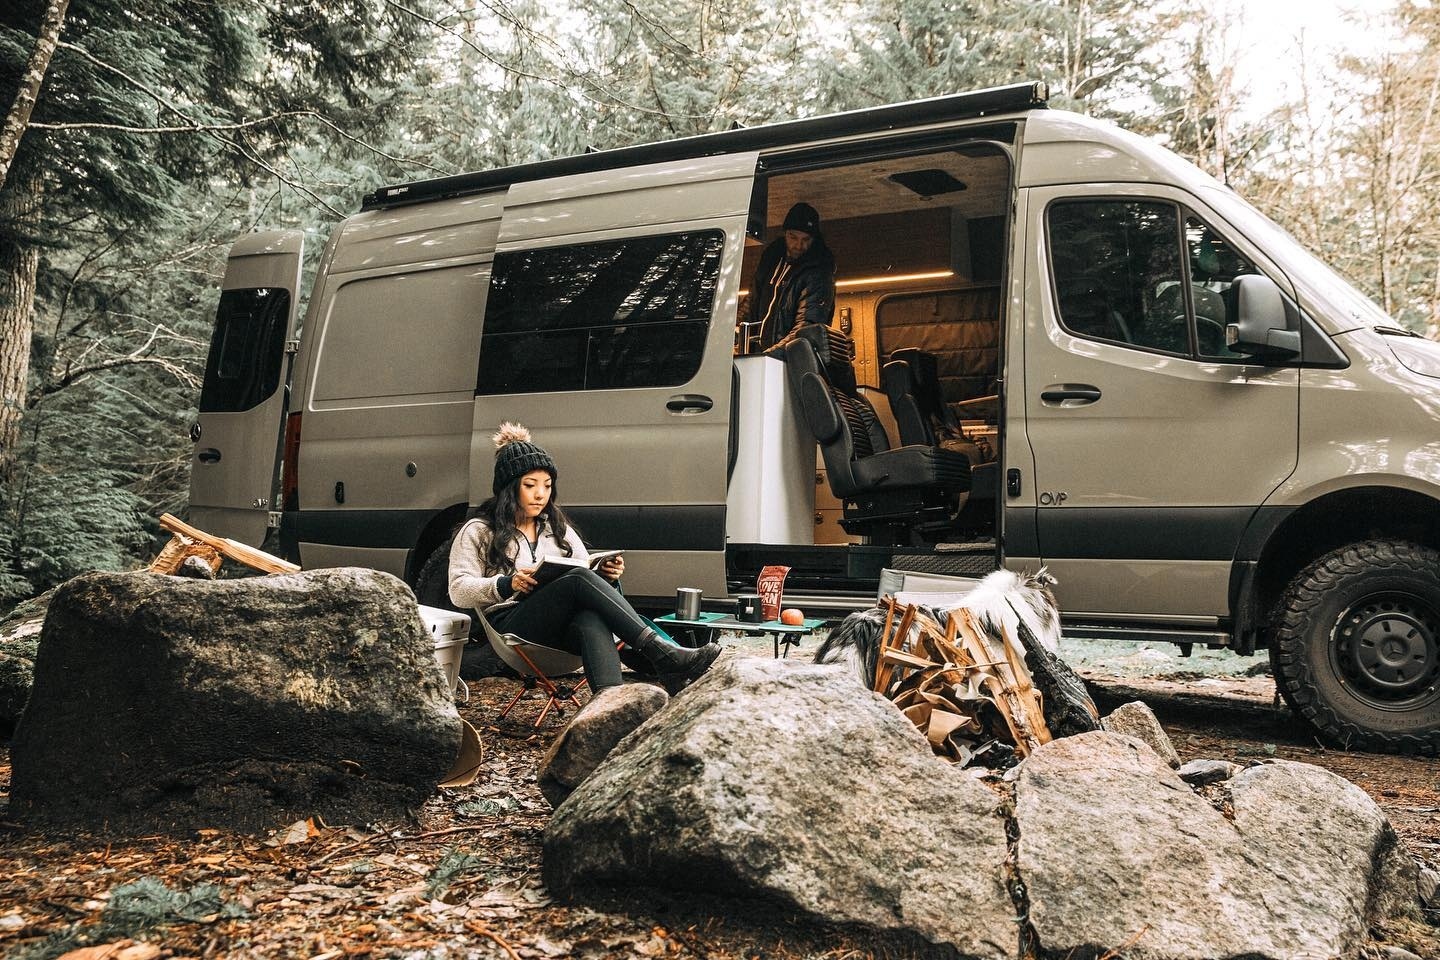 Route Line Launches in Seattle 🚐 @routelineco, a brand new transportation concept from Seattle’s own Johannes Ariens of LOGE Camps, offers Northwest travel enthusiasts a seamless, cost-friendly option to rent a luxury off-road trailer and camper vans to get that #vanlife on a budget. Read more at FabulousWashington.com.